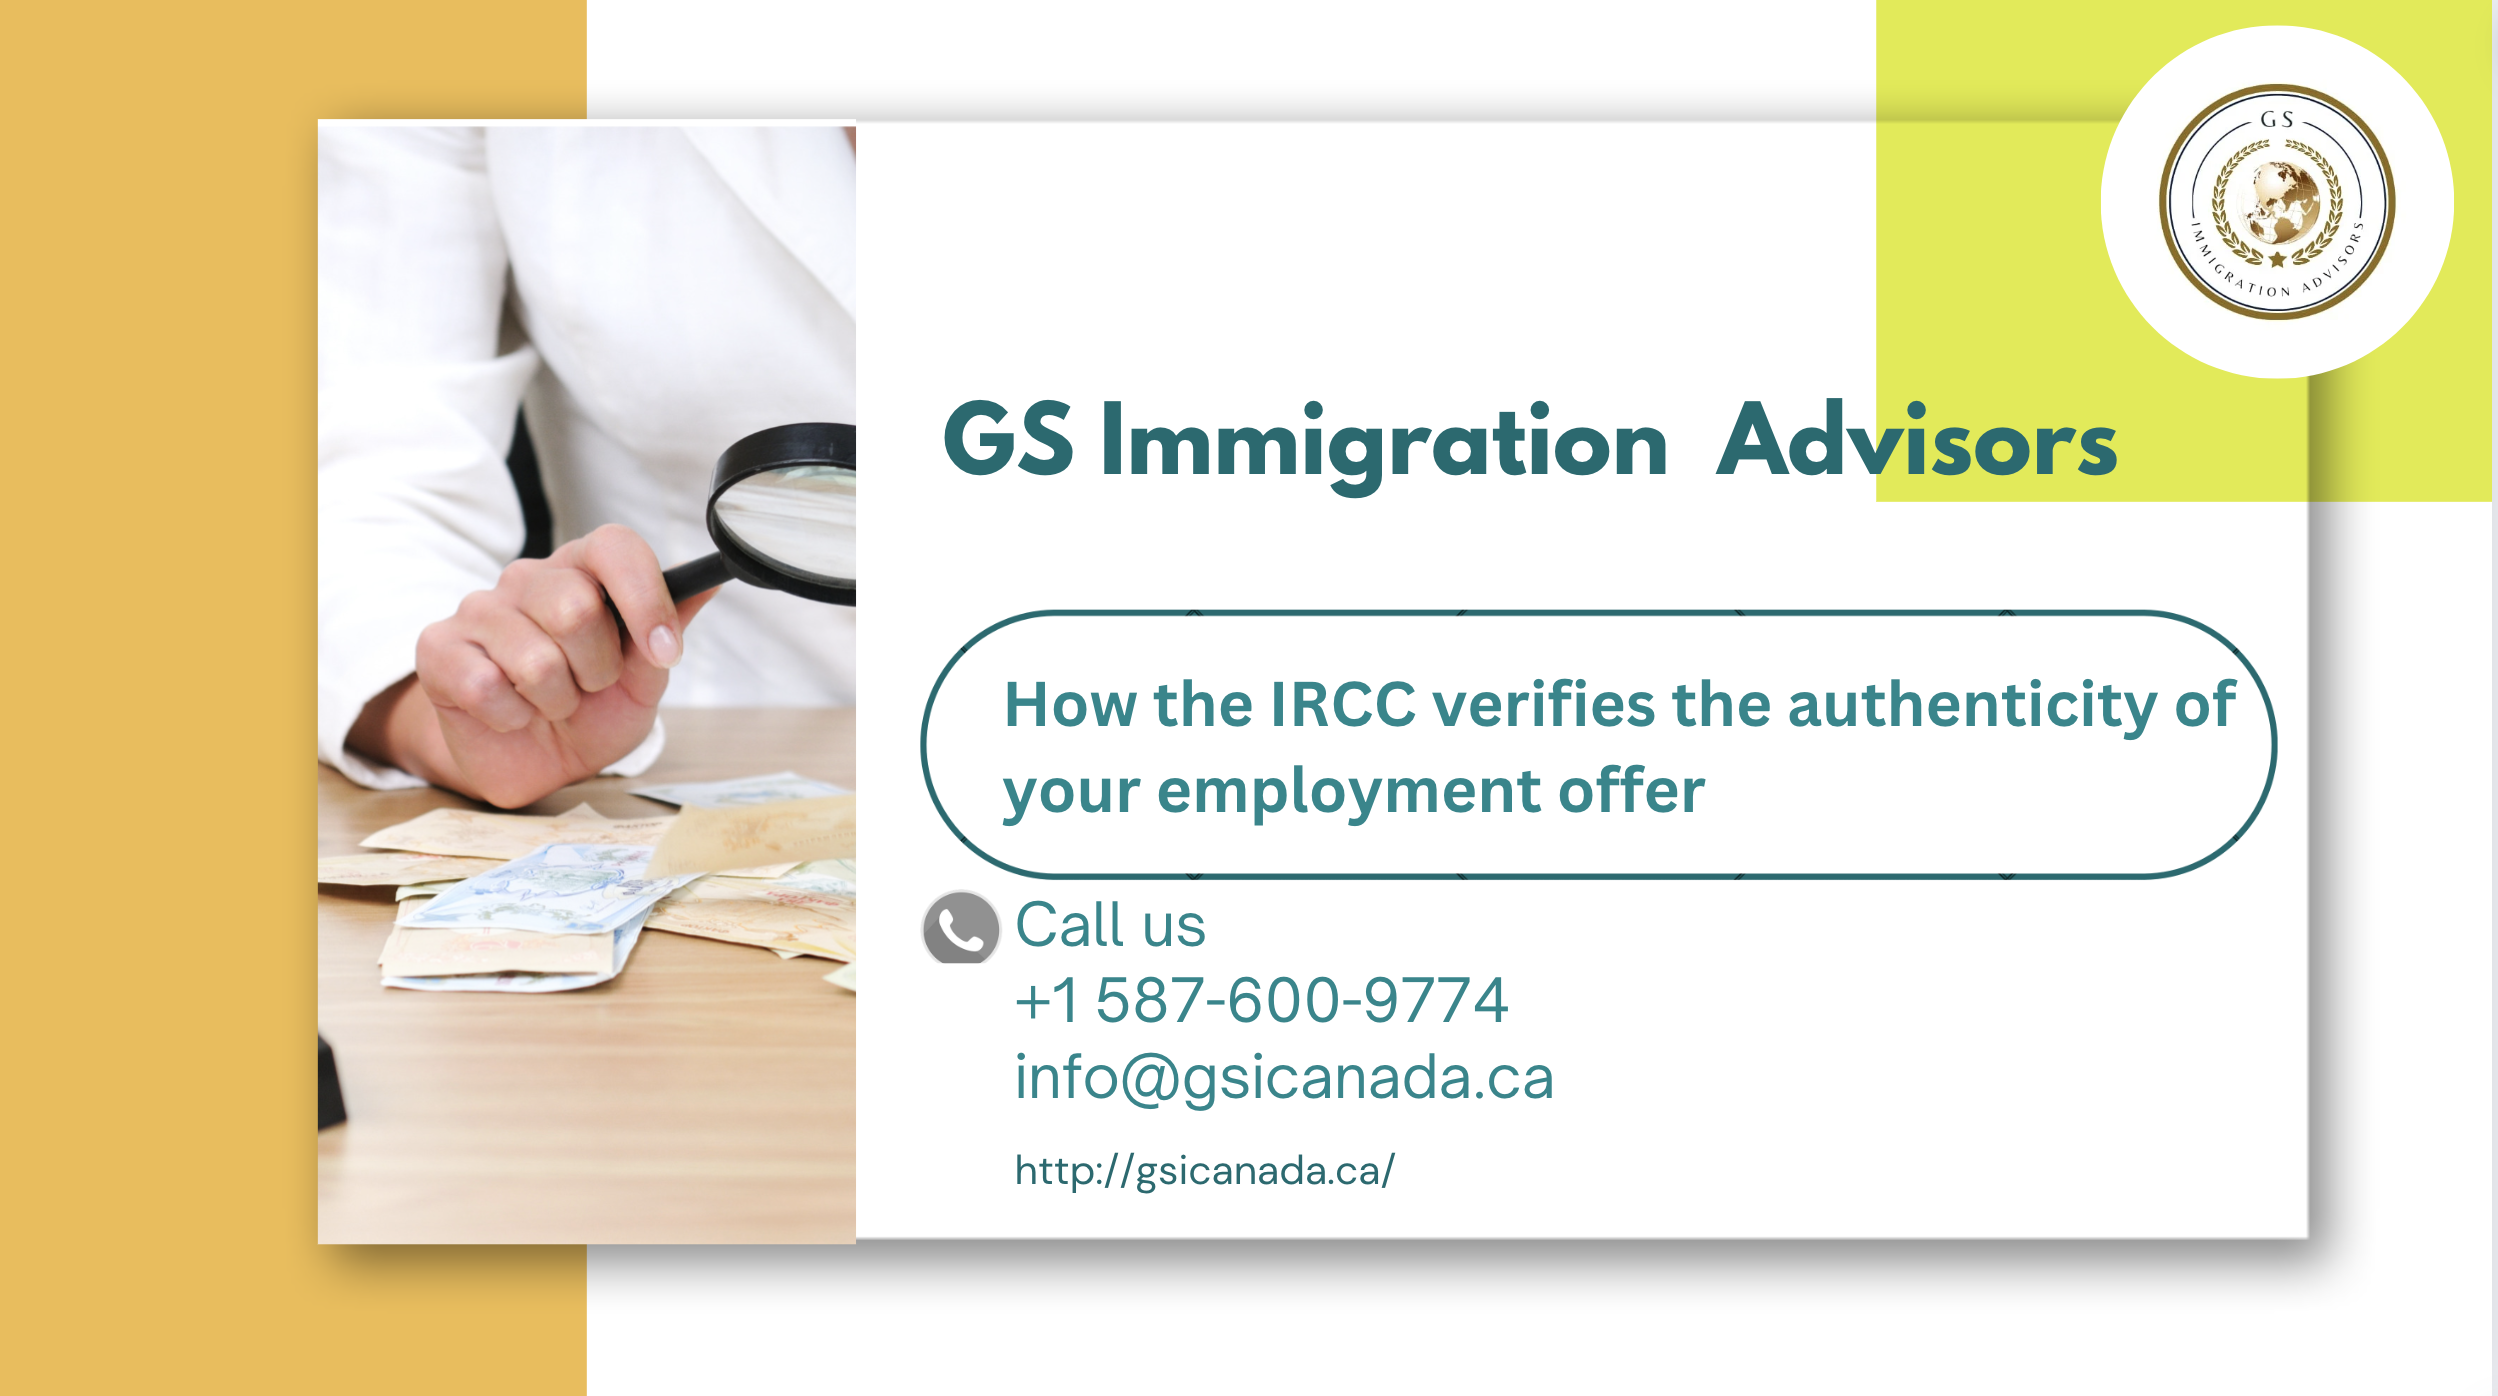 How the IRCC verifies the authenticity of your employment offer